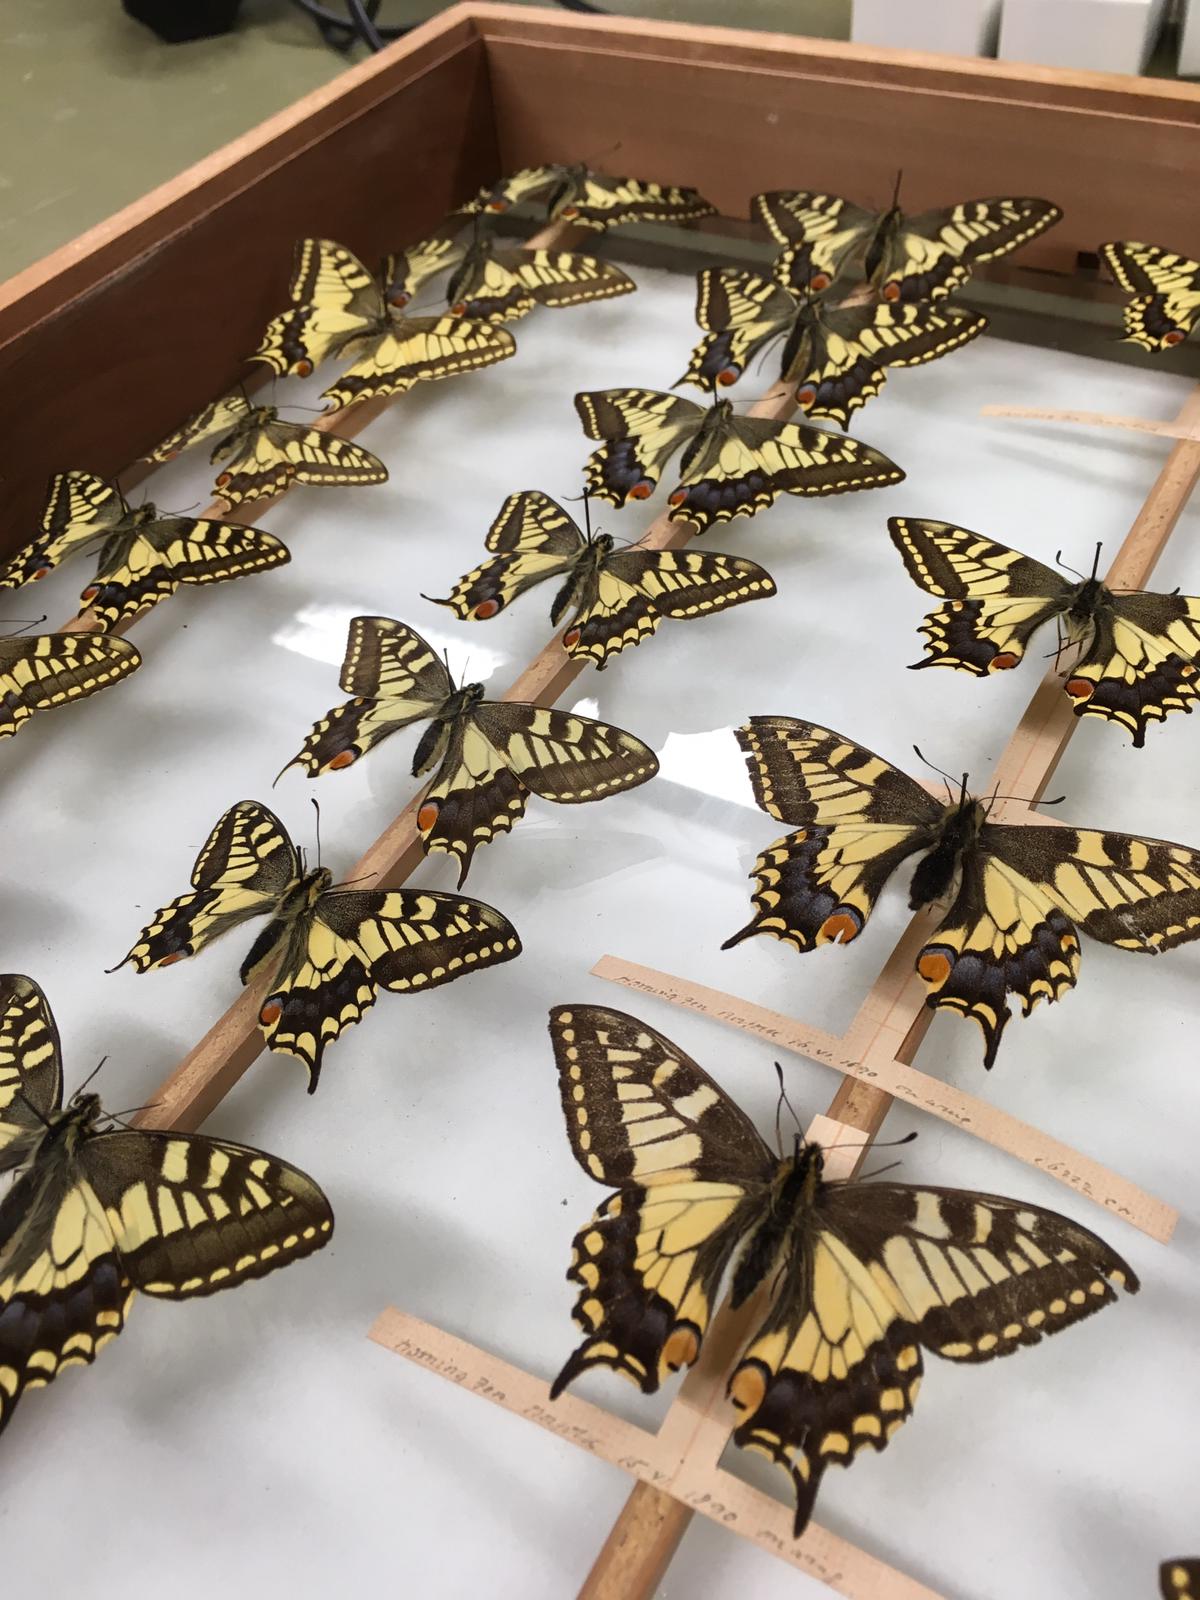 A drawer of swallowtail butterfly specimens at the UMZC. Photograph by Matt Hayes.